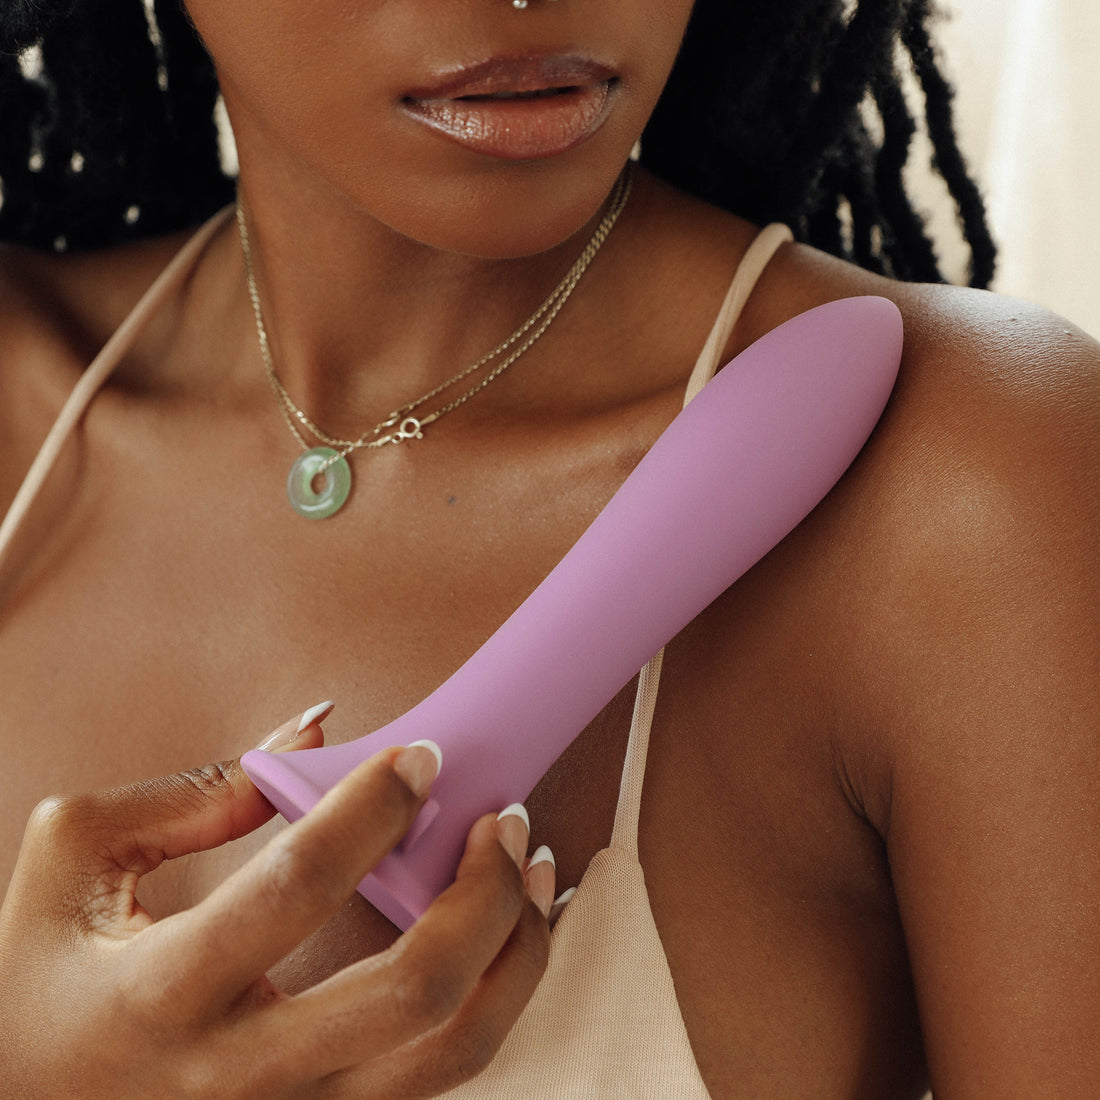 Model holding the purple silicone suction cup dildo - Canta